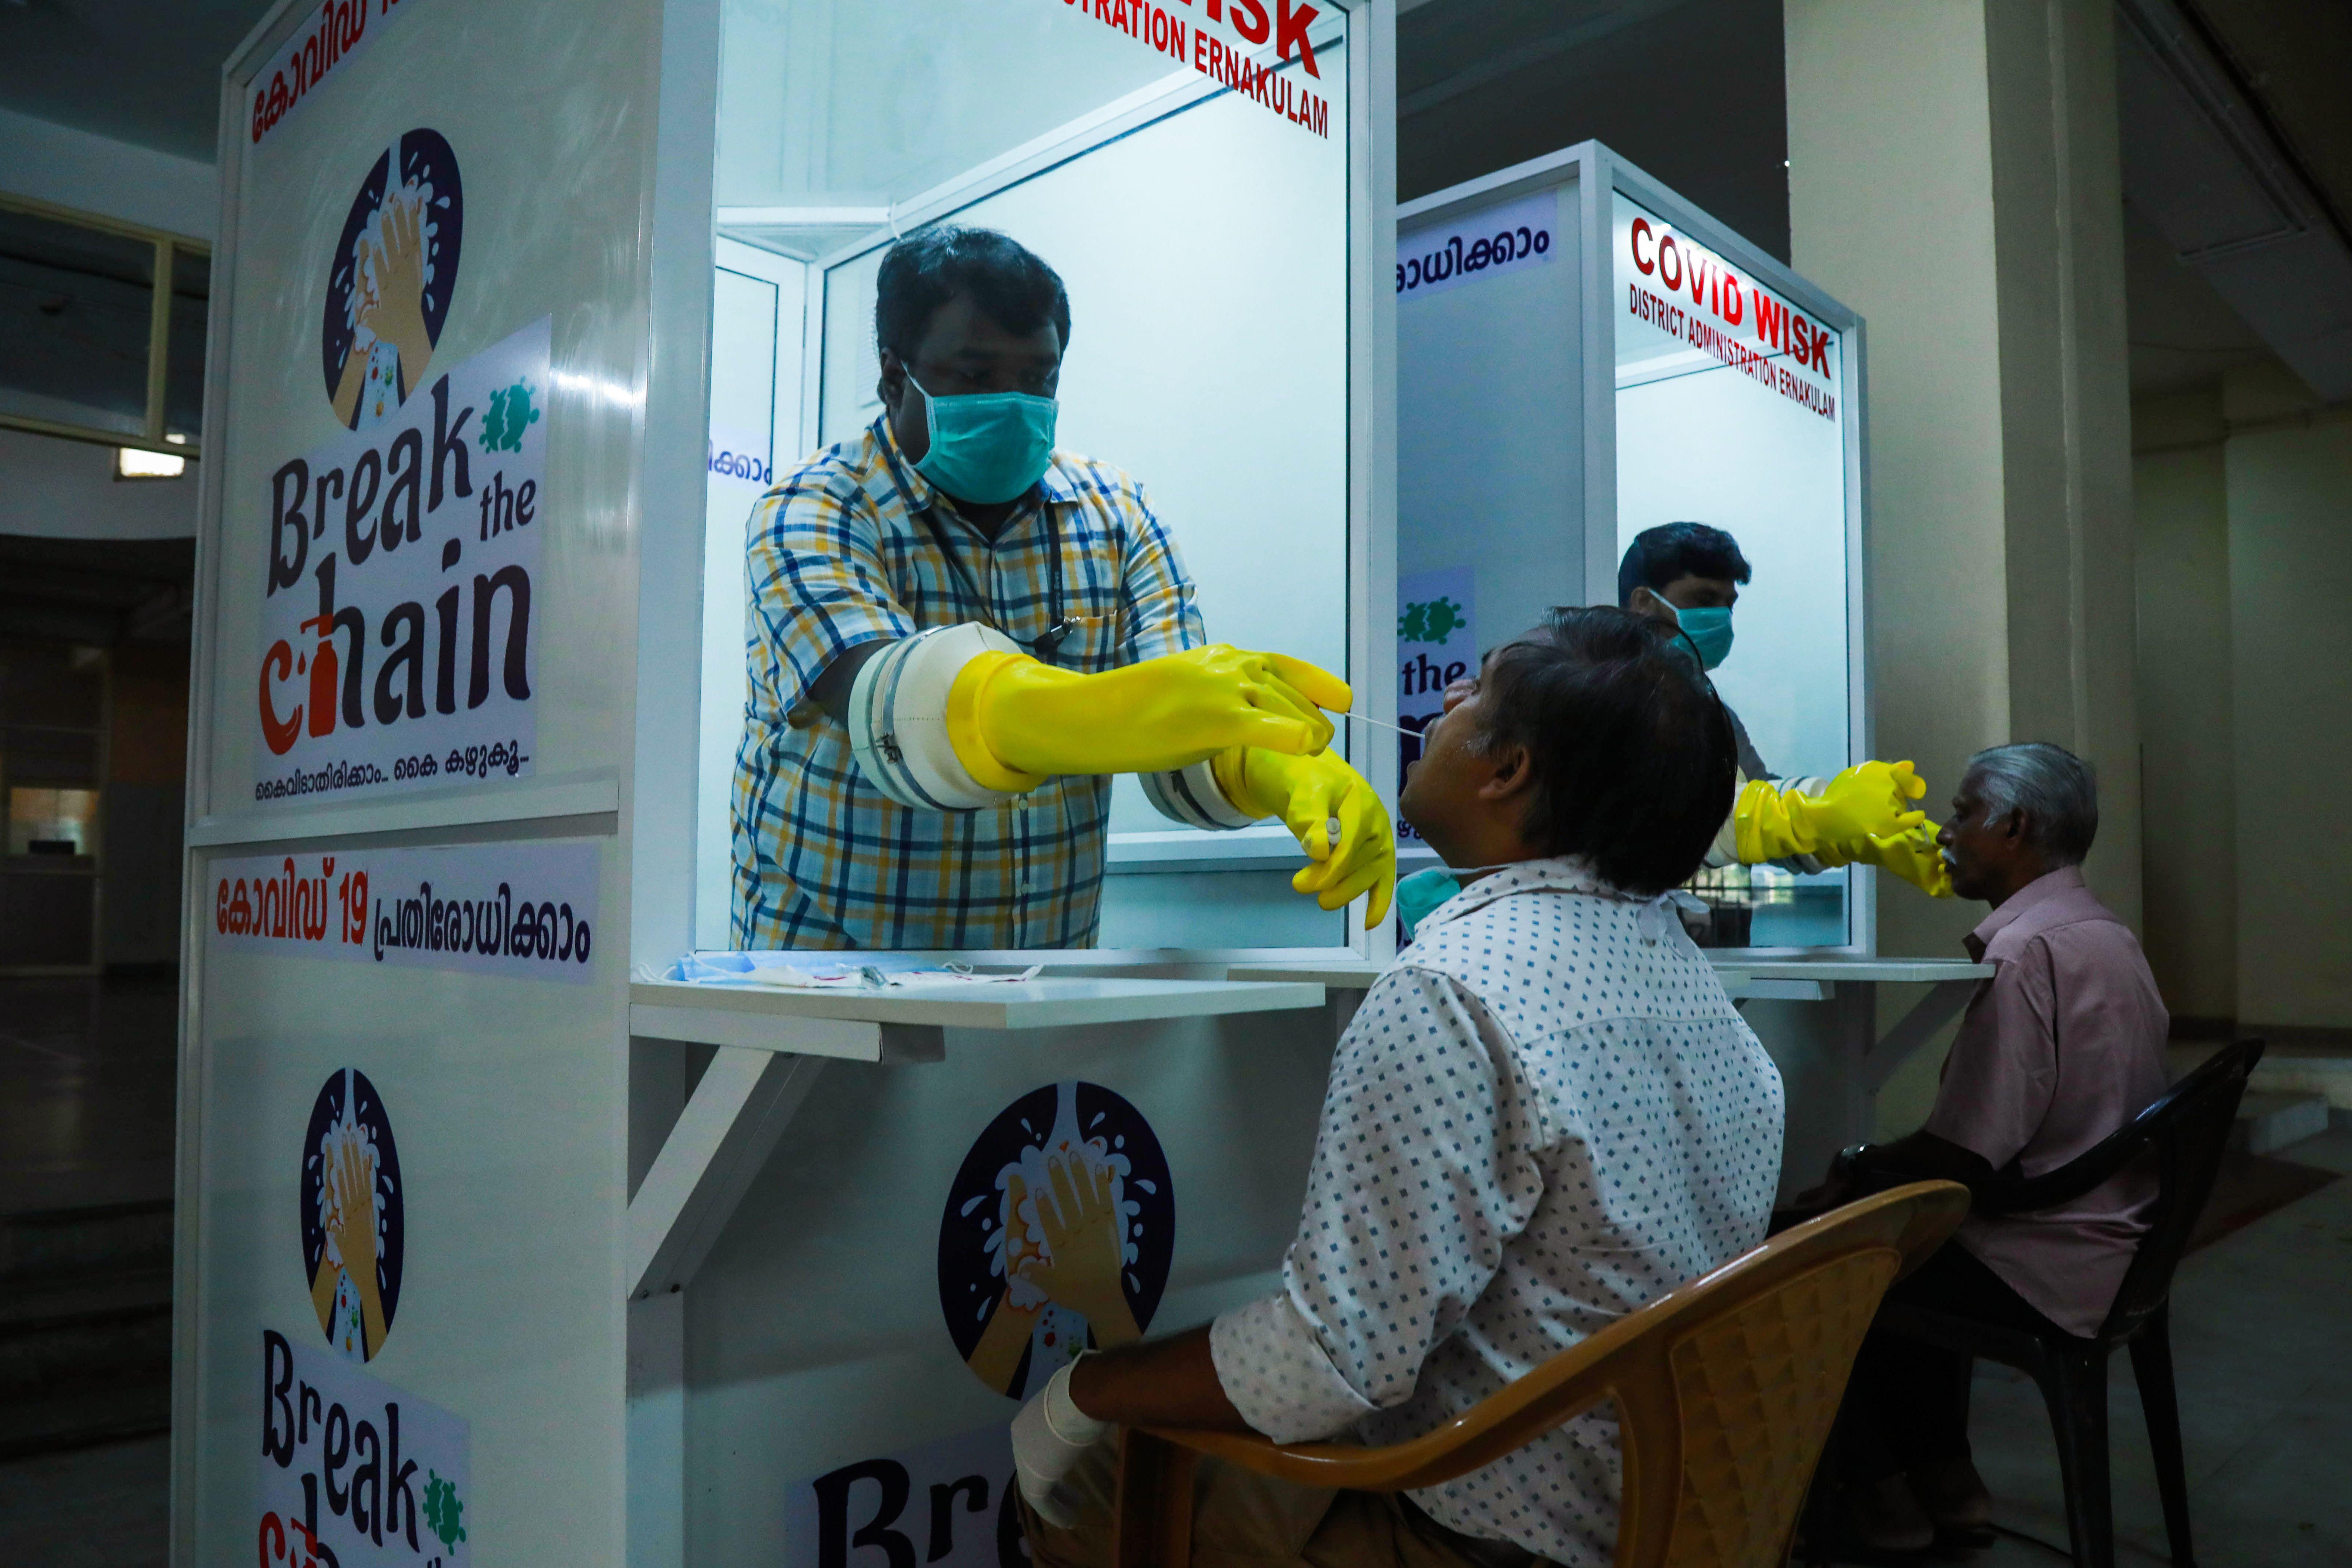 Two kiosks bearing signs that say "Break the Chain." In each kiosk, a medical professional takes a swab sample from a seated person's nose.